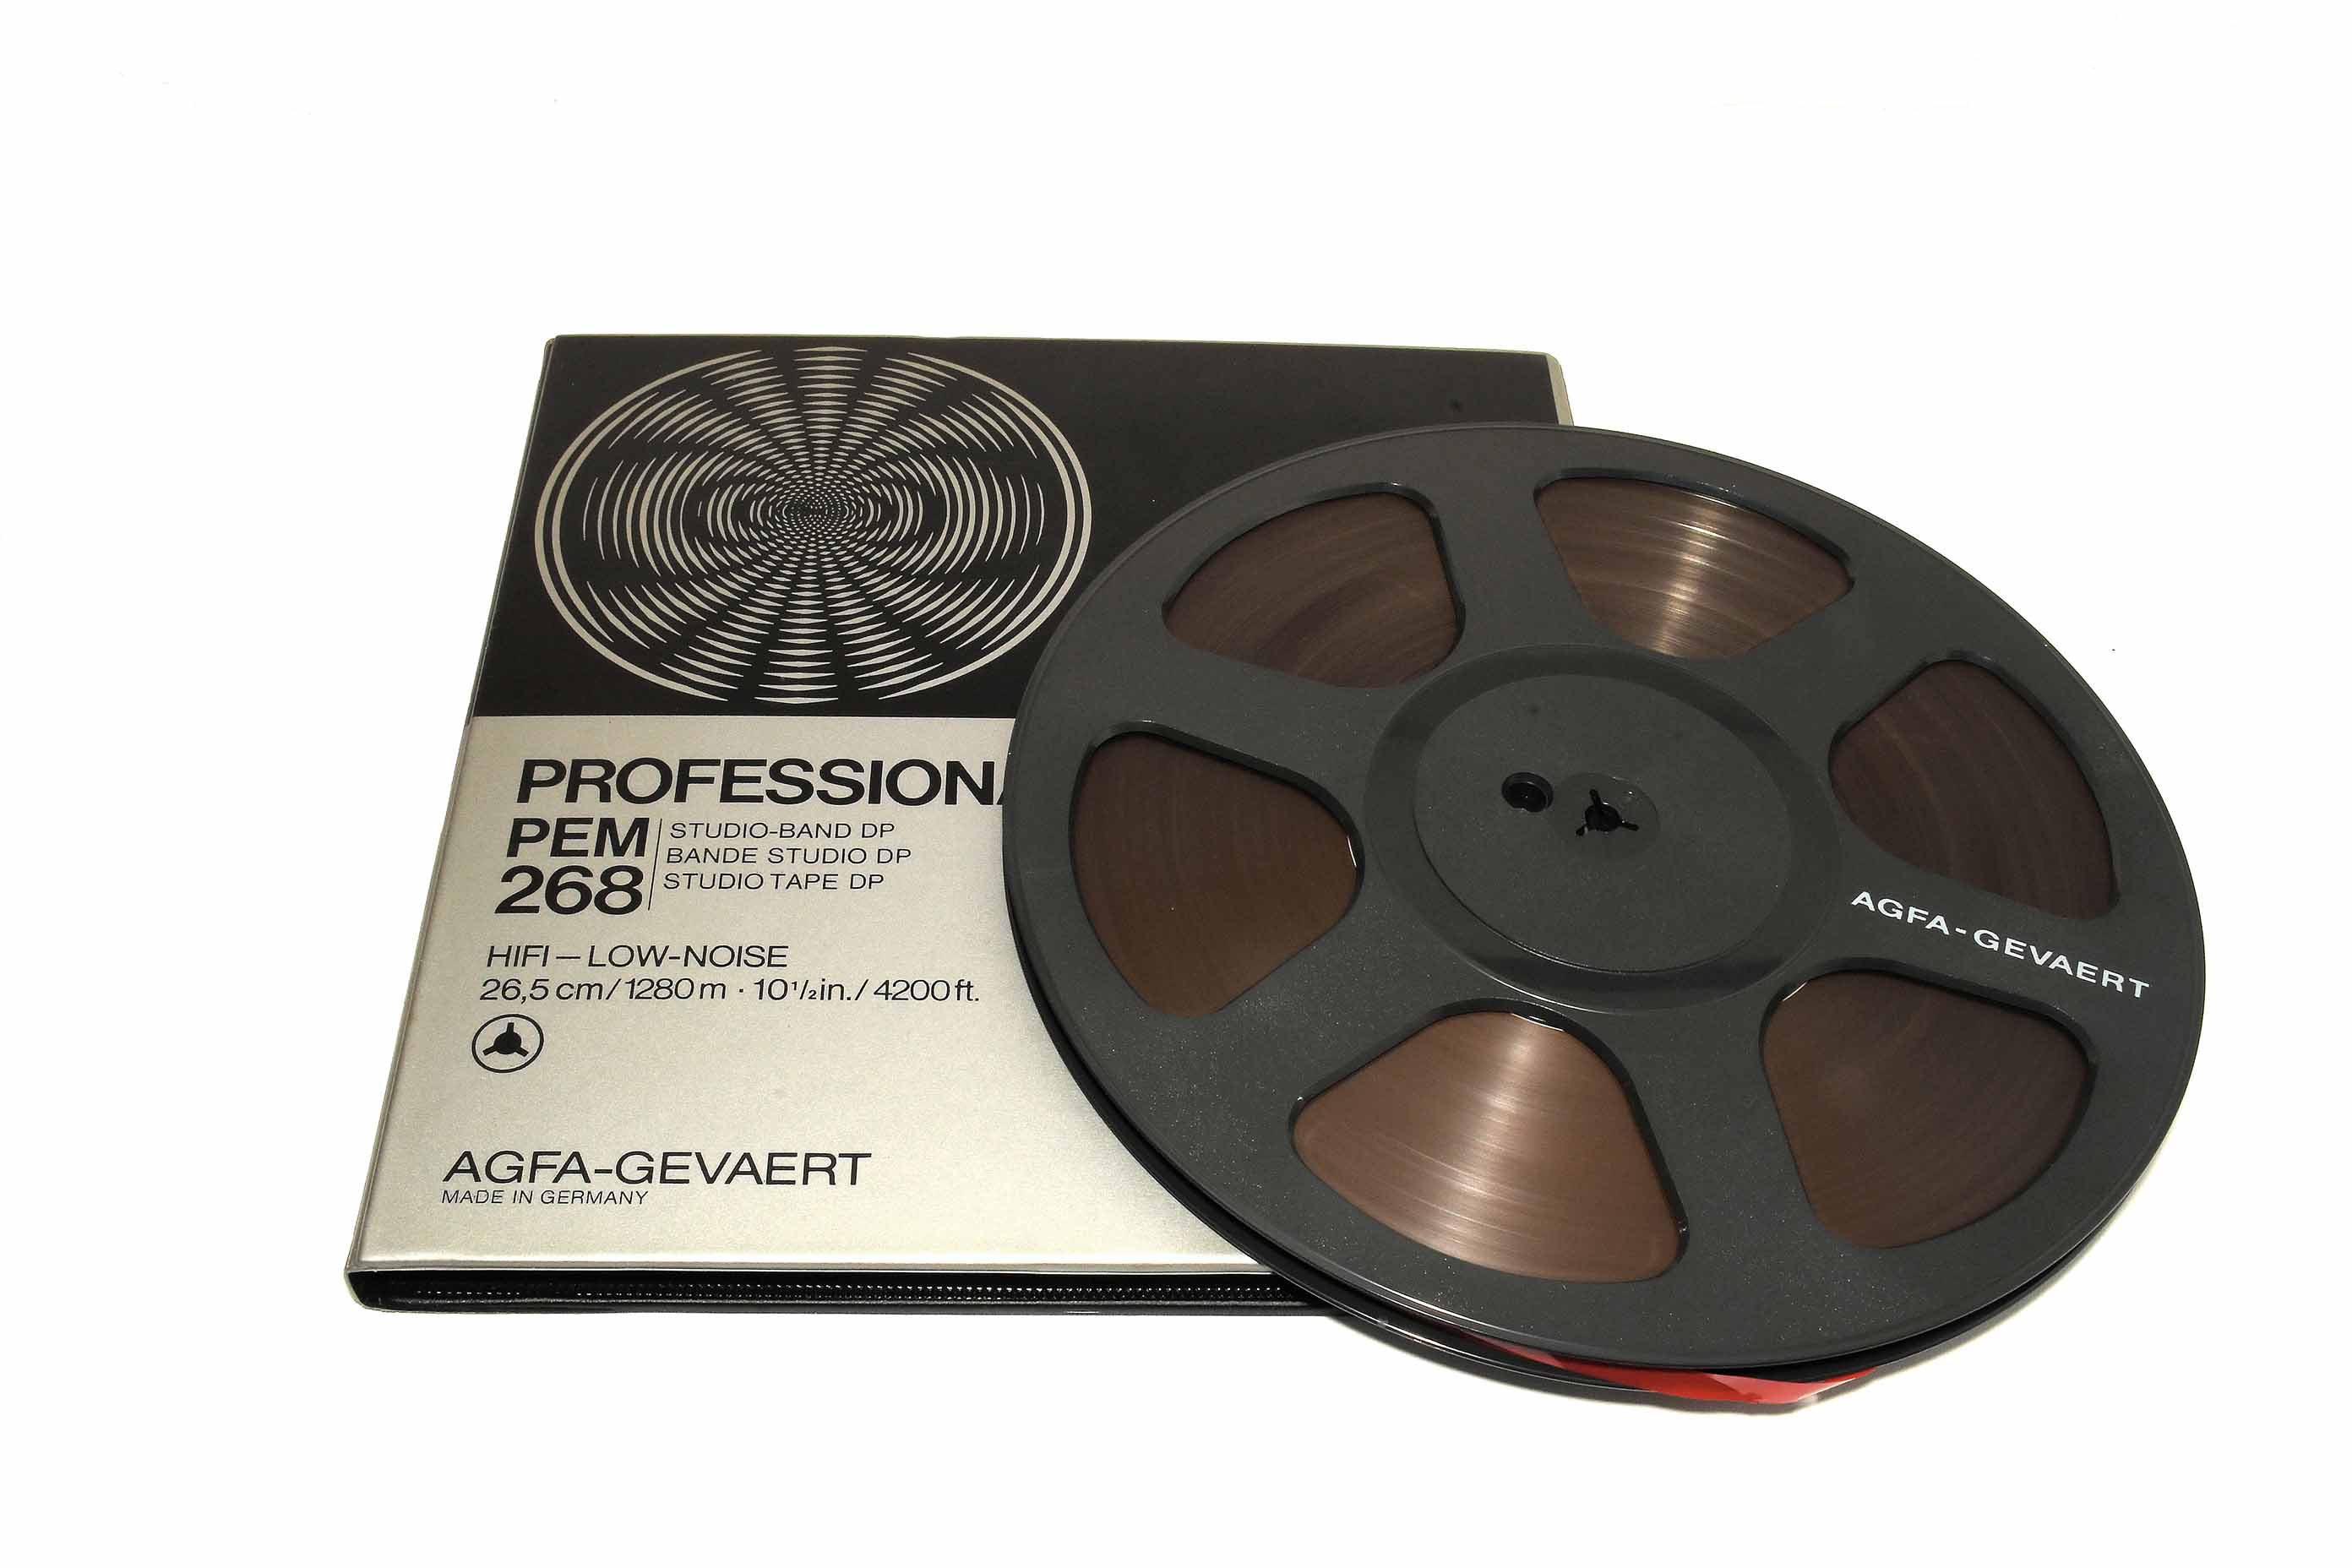 Reels For Reel-to-Reel Decks: Types, Sizes & Materials Compared - RX Reels